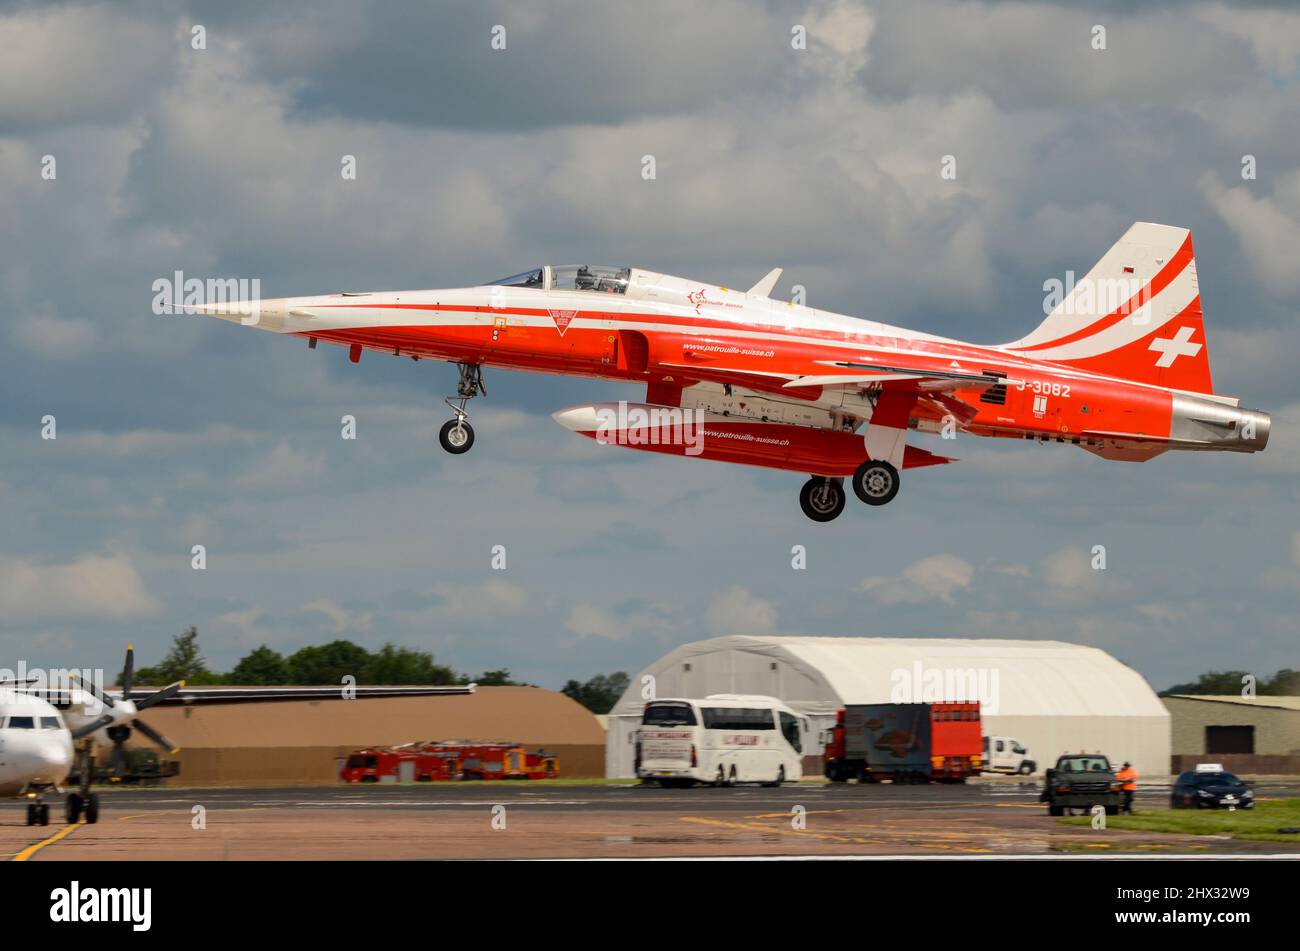 Northrop F-5E Tiger II of Patrouille Suisse, Swiss display team fighter jet plane arriving at Royal International Air Tattoo airshow, UK, RAF Fairford Stock Photo